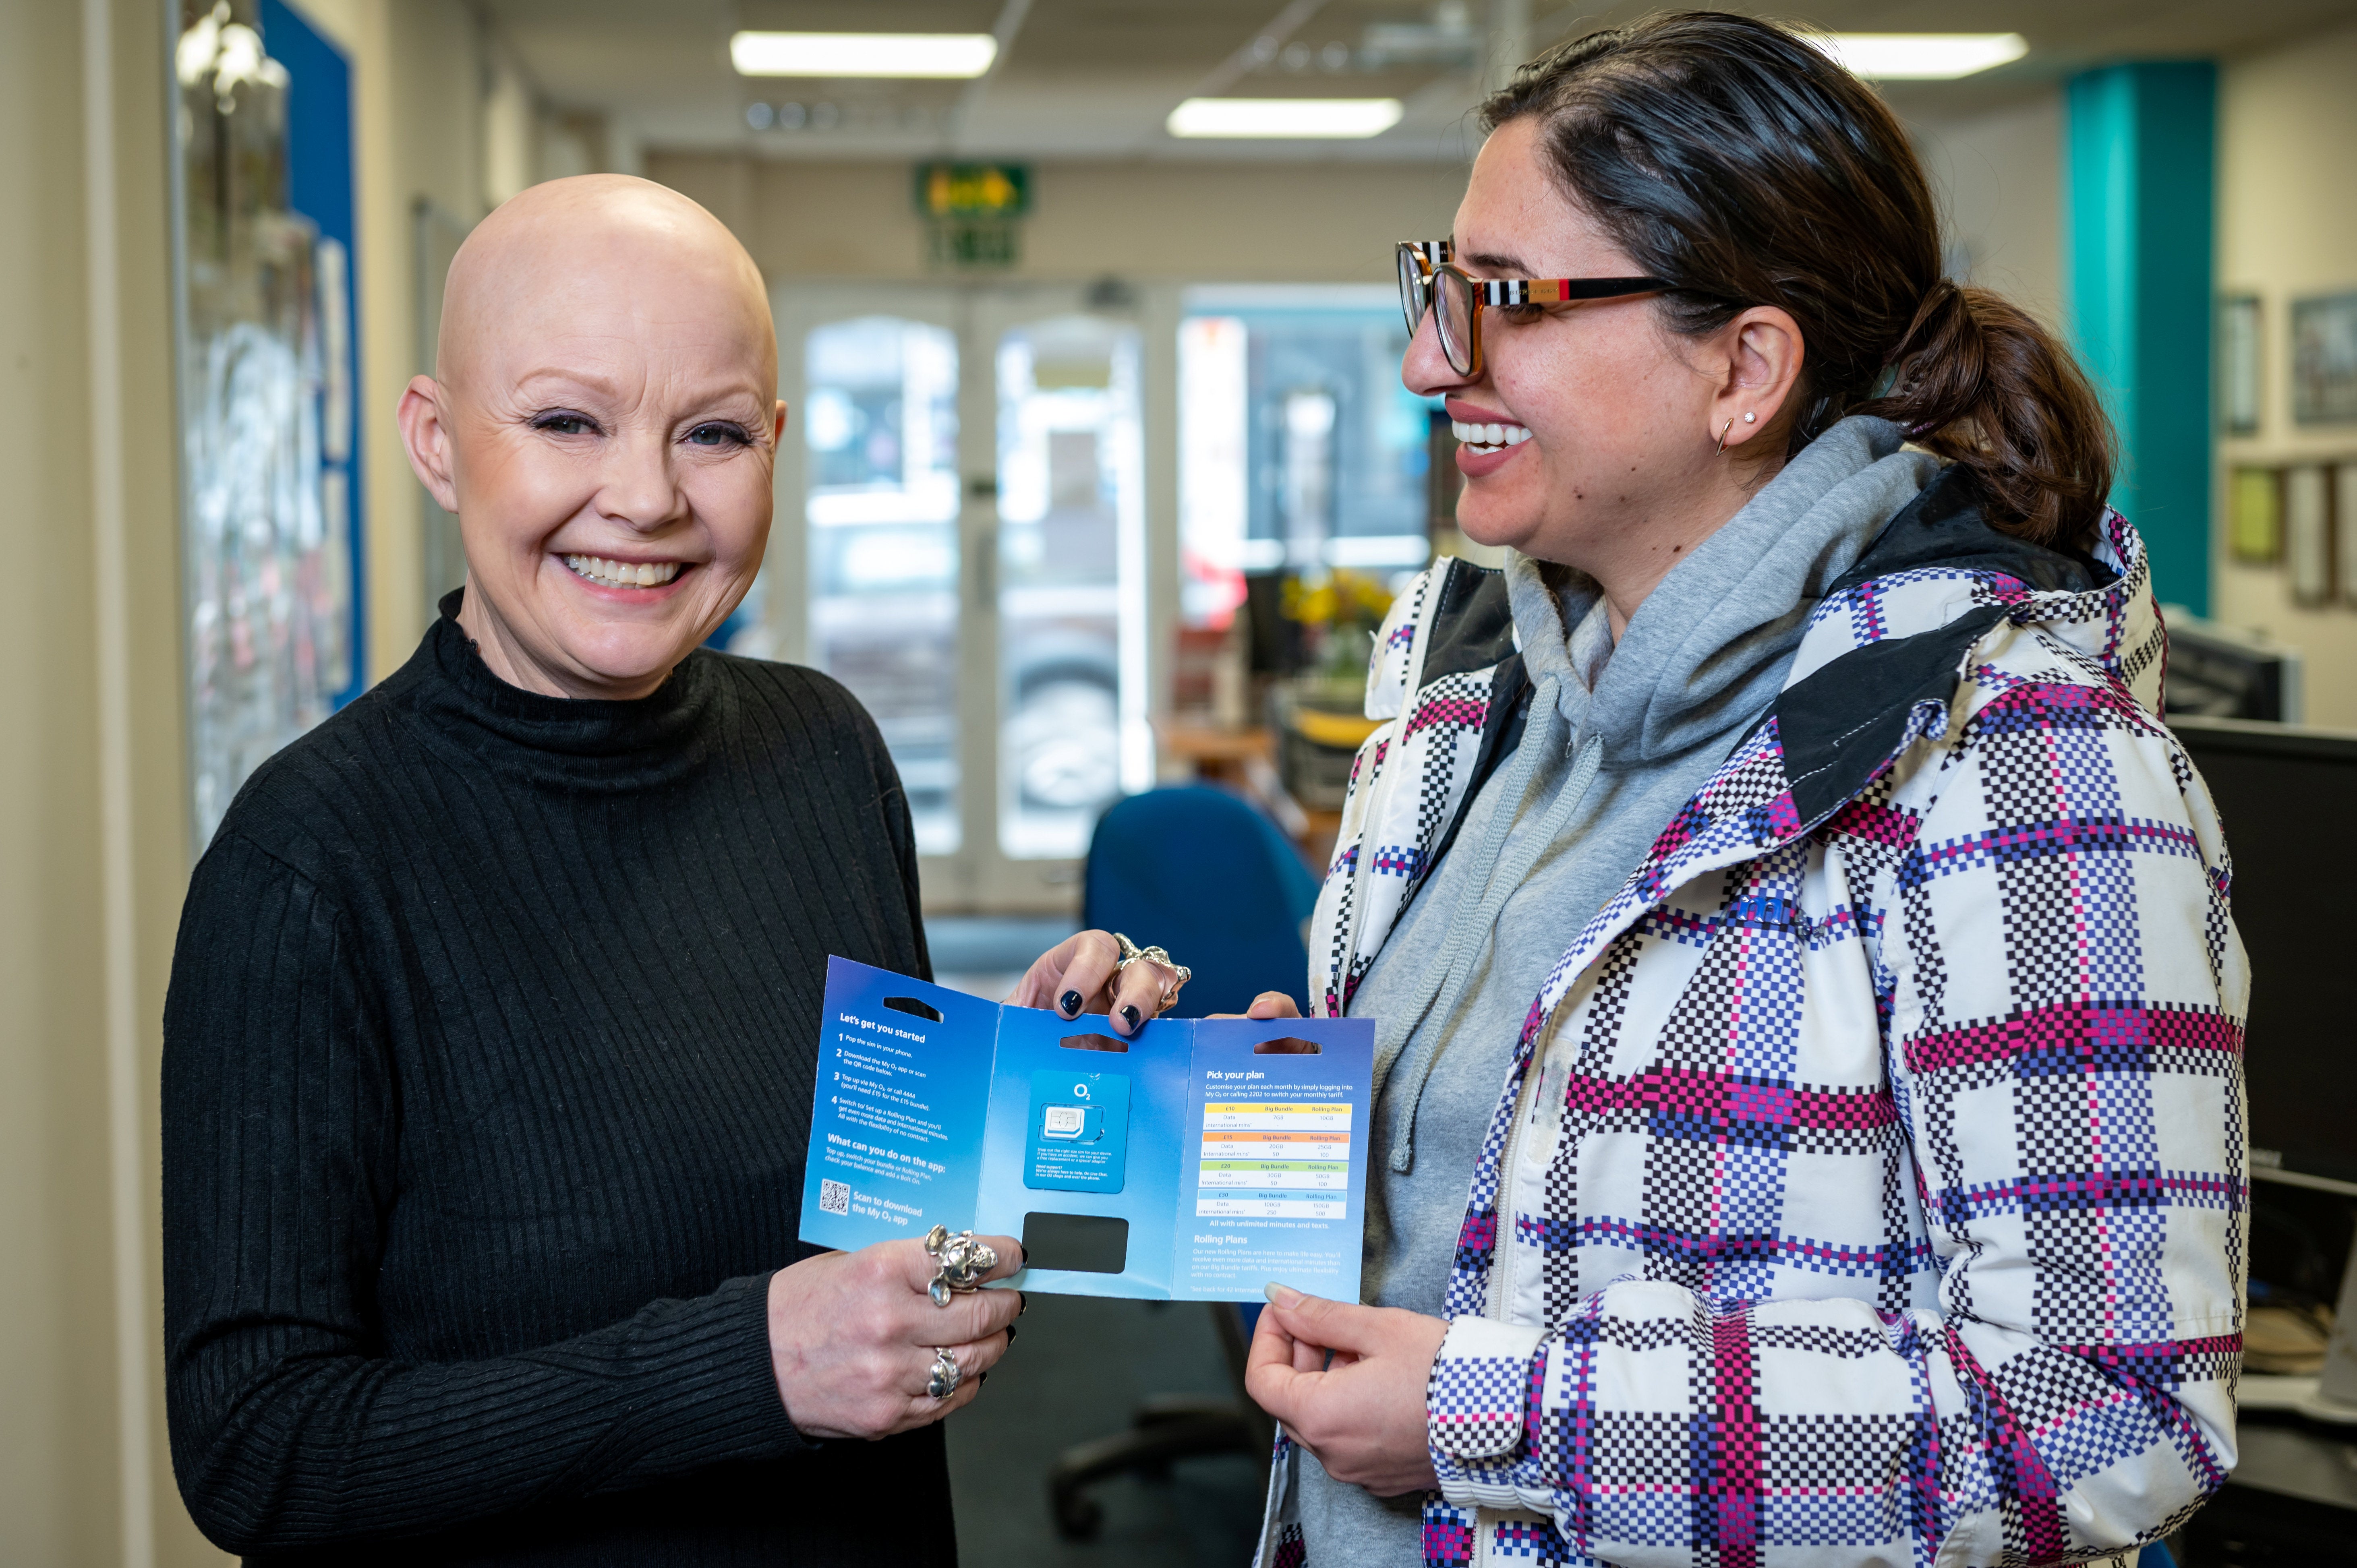 TV personality Gail Porter has partnered with Virgin Media O2 and Good Things Foundation to raise awareness of the National Databank – where the 1000th Hub has opened, providing free O2 data to people in need